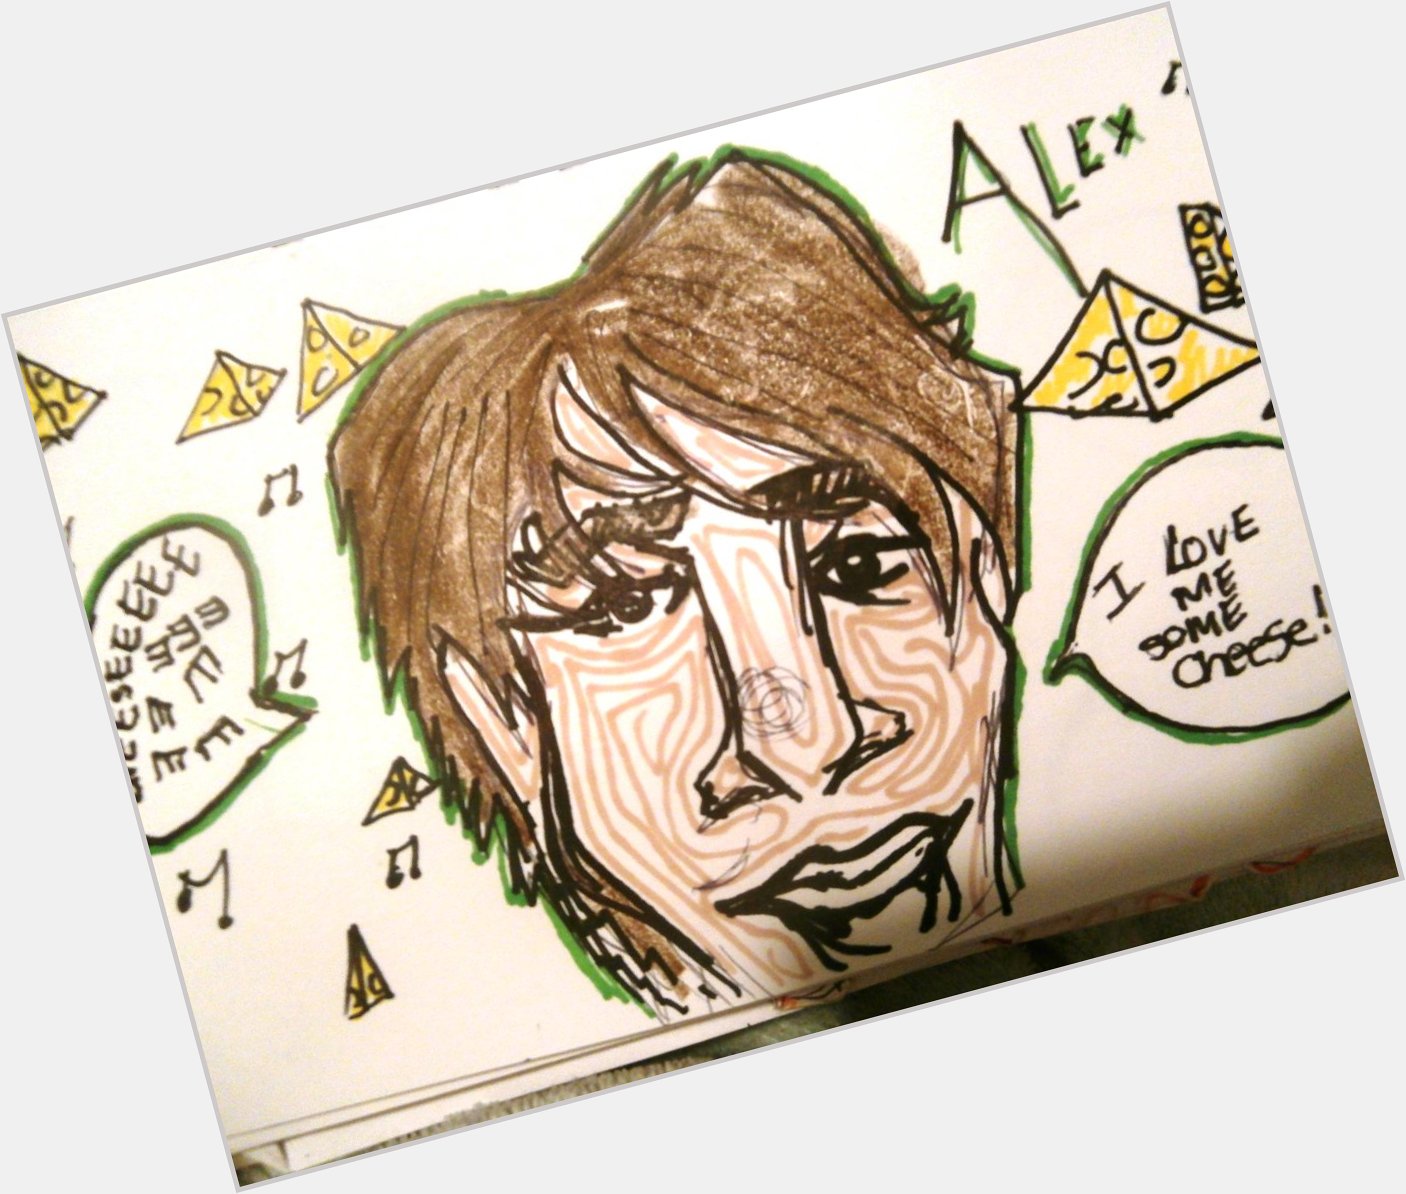 Happy Birthday Alex James! :) xx One of the sketches I had done of him...x 